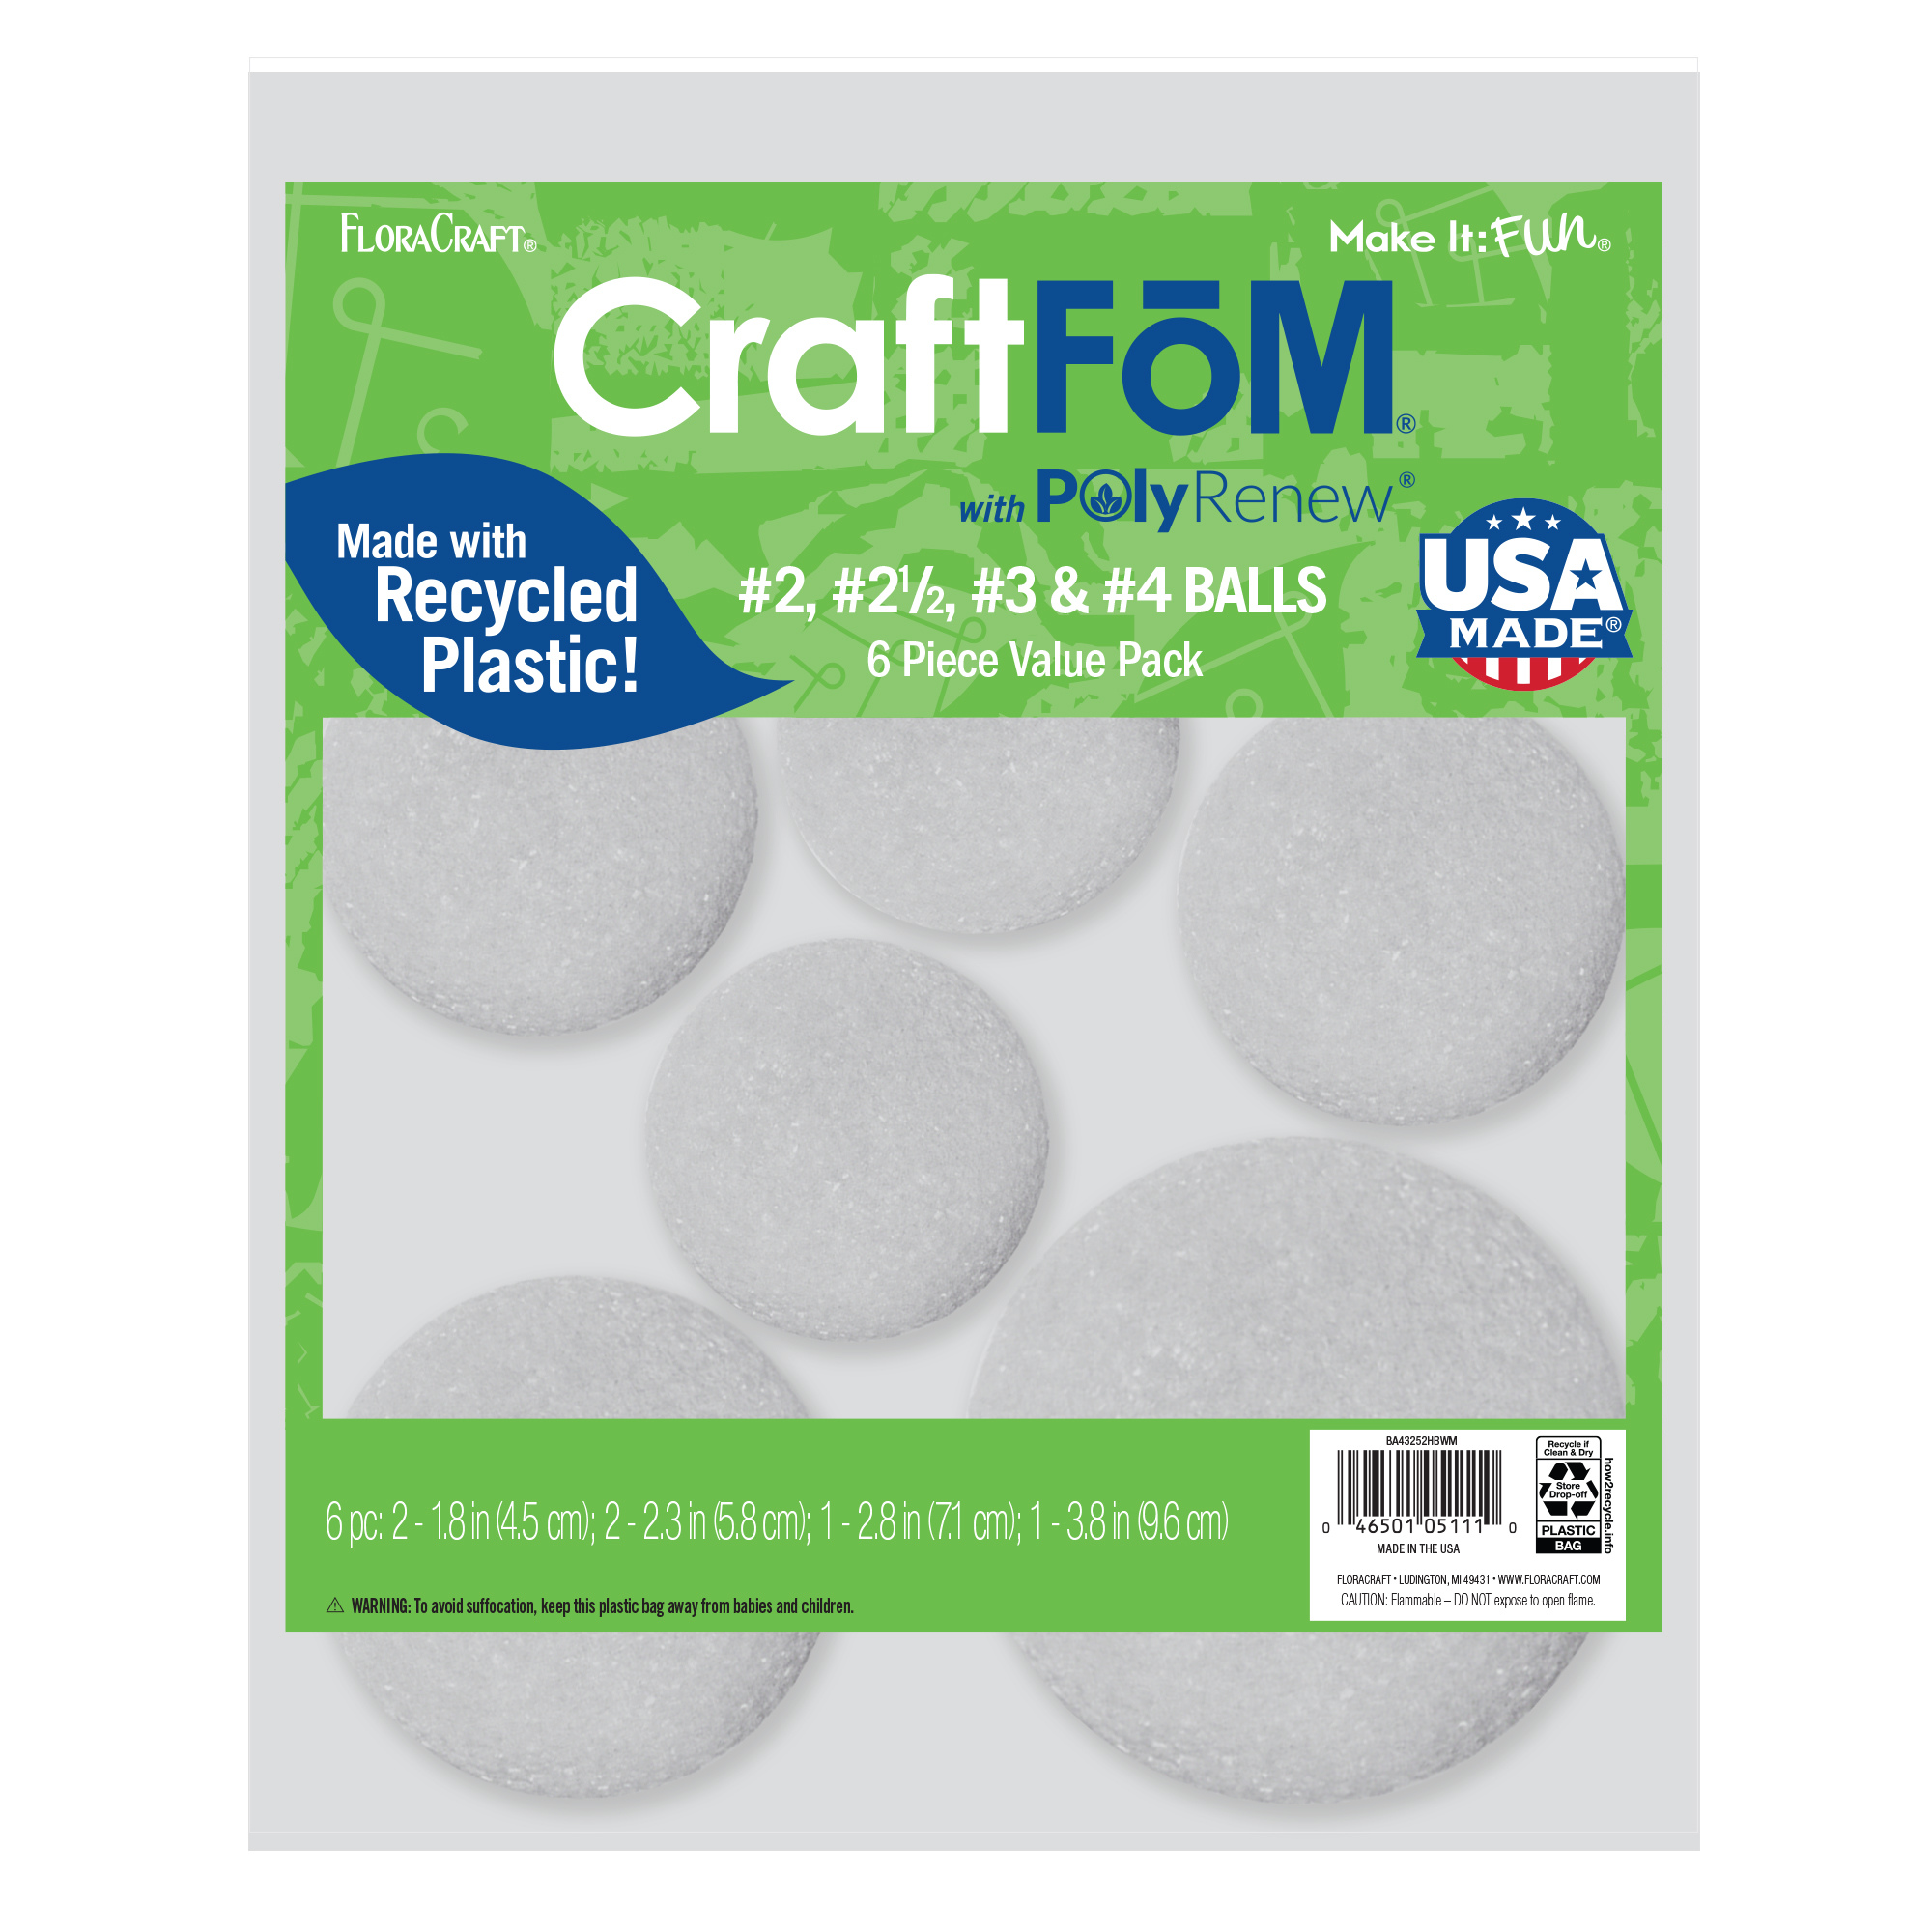 FloraCraft CraftFōM 6 piece Crafting Foam Ball Assorted Sizes White – 2 piece 1.8 inch, 2 piece 2.3 inch, 1 piece 2.8 inch and 1 piece 3.8 inch - image 1 of 7